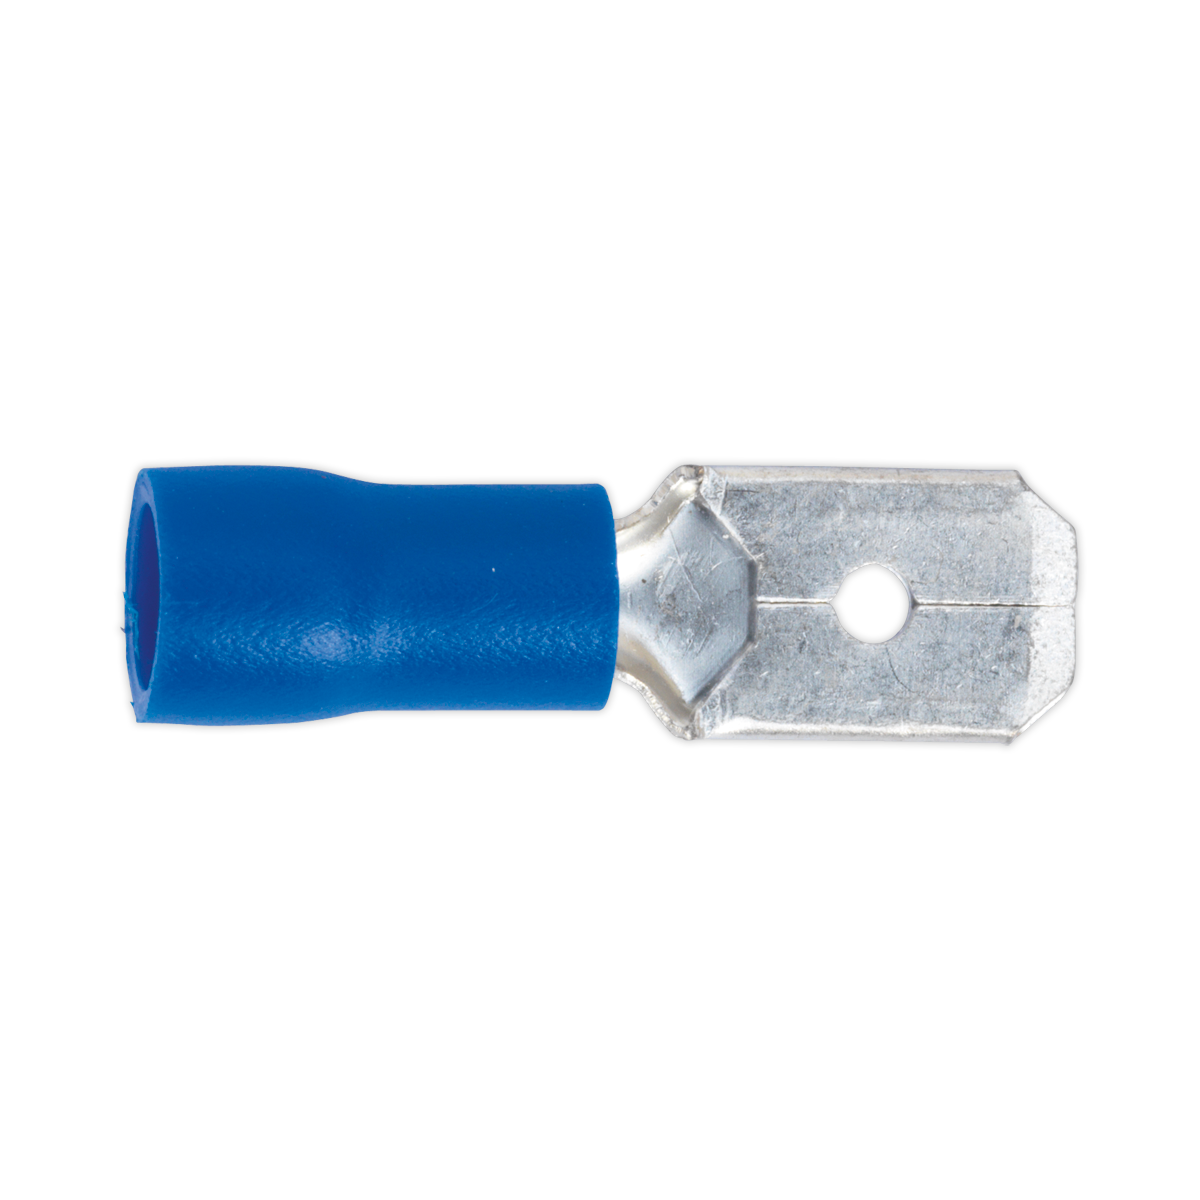 Push-On Terminal 6.3mm Male Blue Pack of 100 - BT21 - Farming Parts